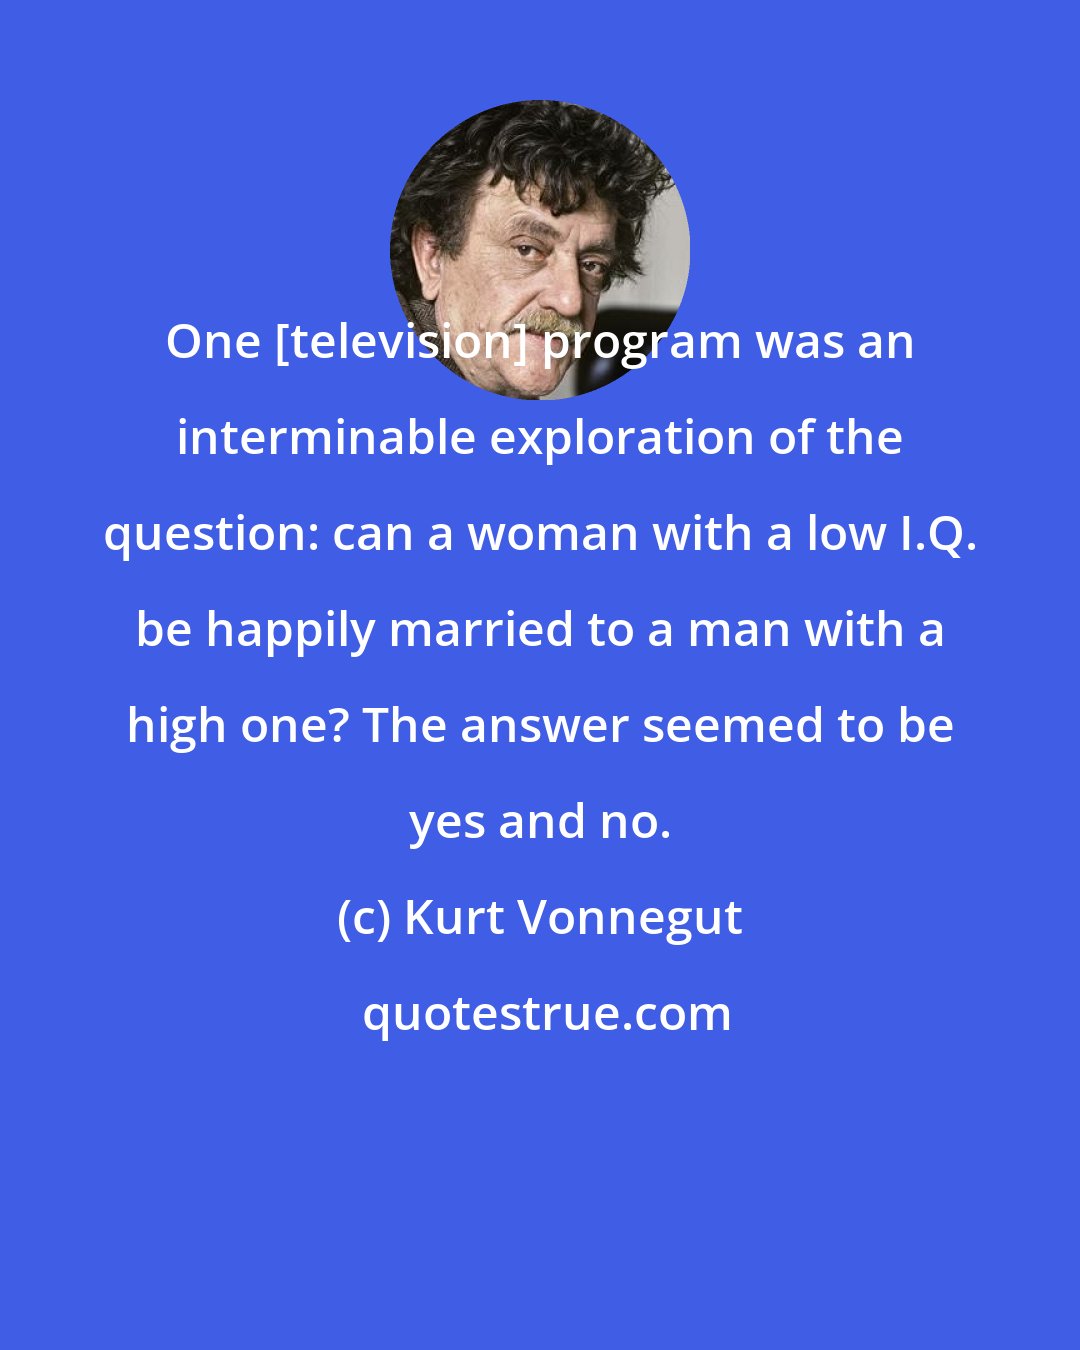 Kurt Vonnegut: One [television] program was an interminable exploration of the question: can a woman with a low I.Q. be happily married to a man with a high one? The answer seemed to be yes and no.